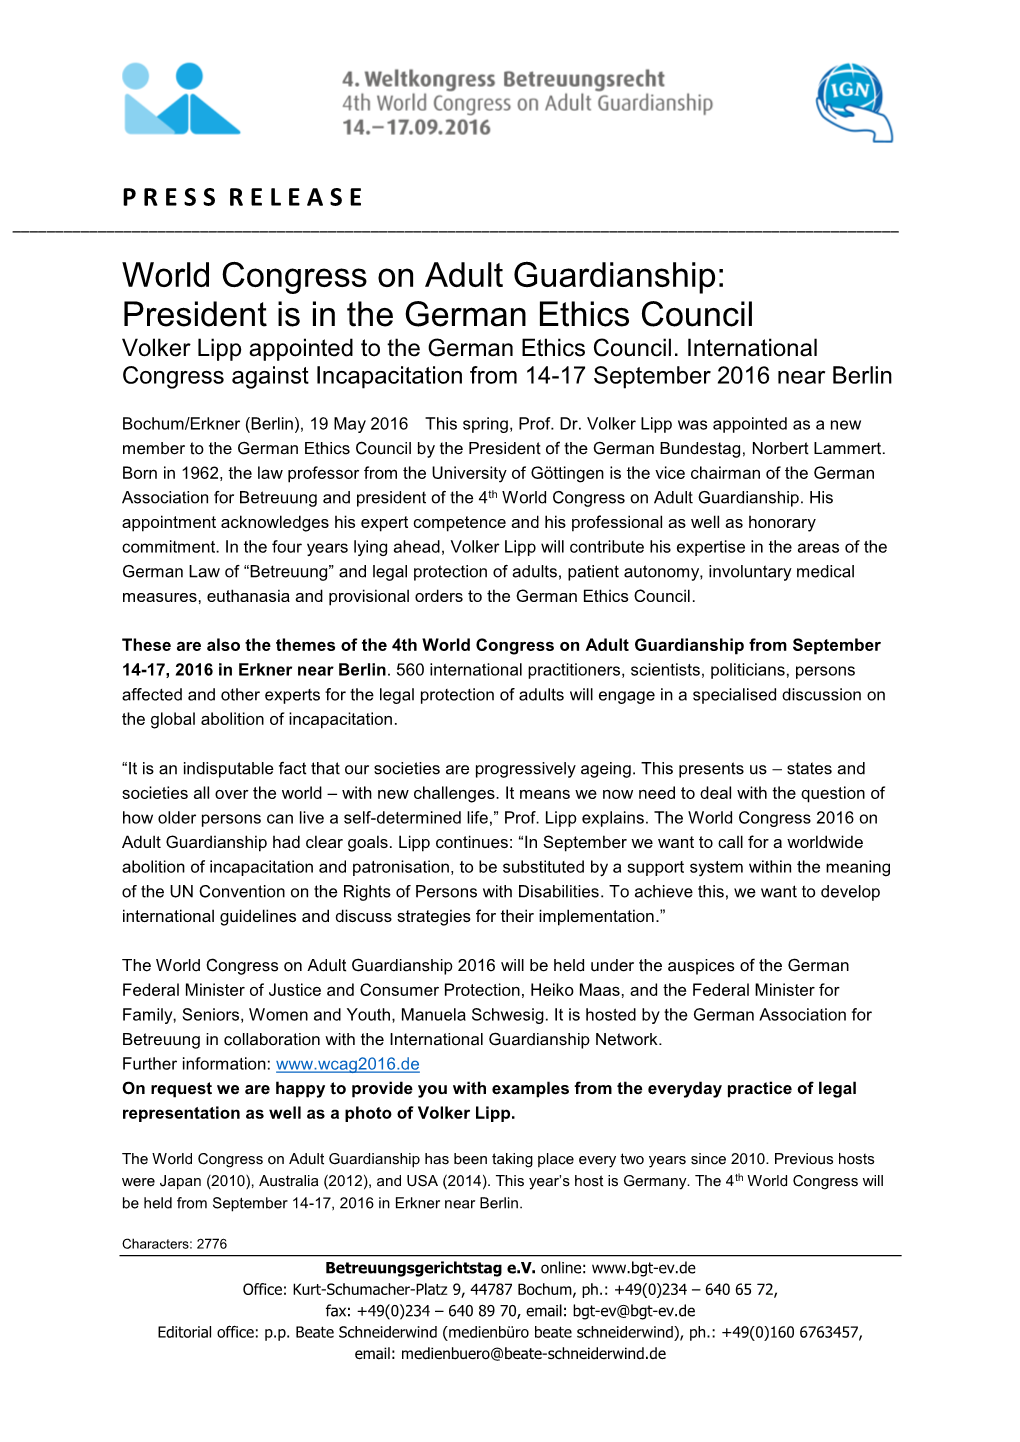 World Congress on Adult Guardianship: President Is in the German Ethics Council